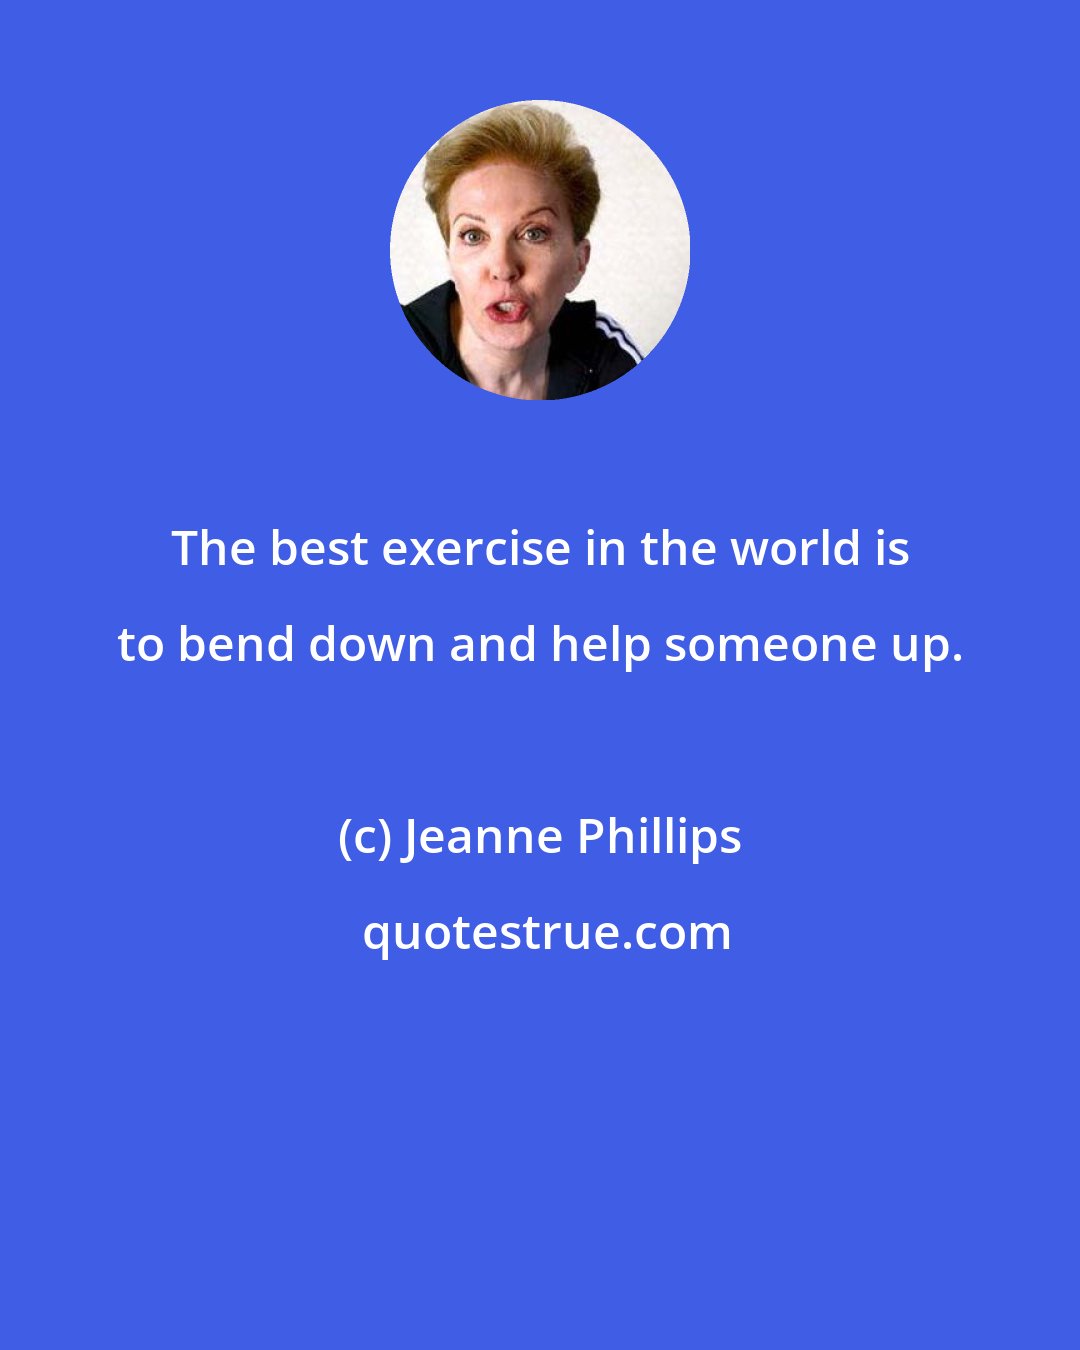 Jeanne Phillips: The best exercise in the world is to bend down and help someone up.